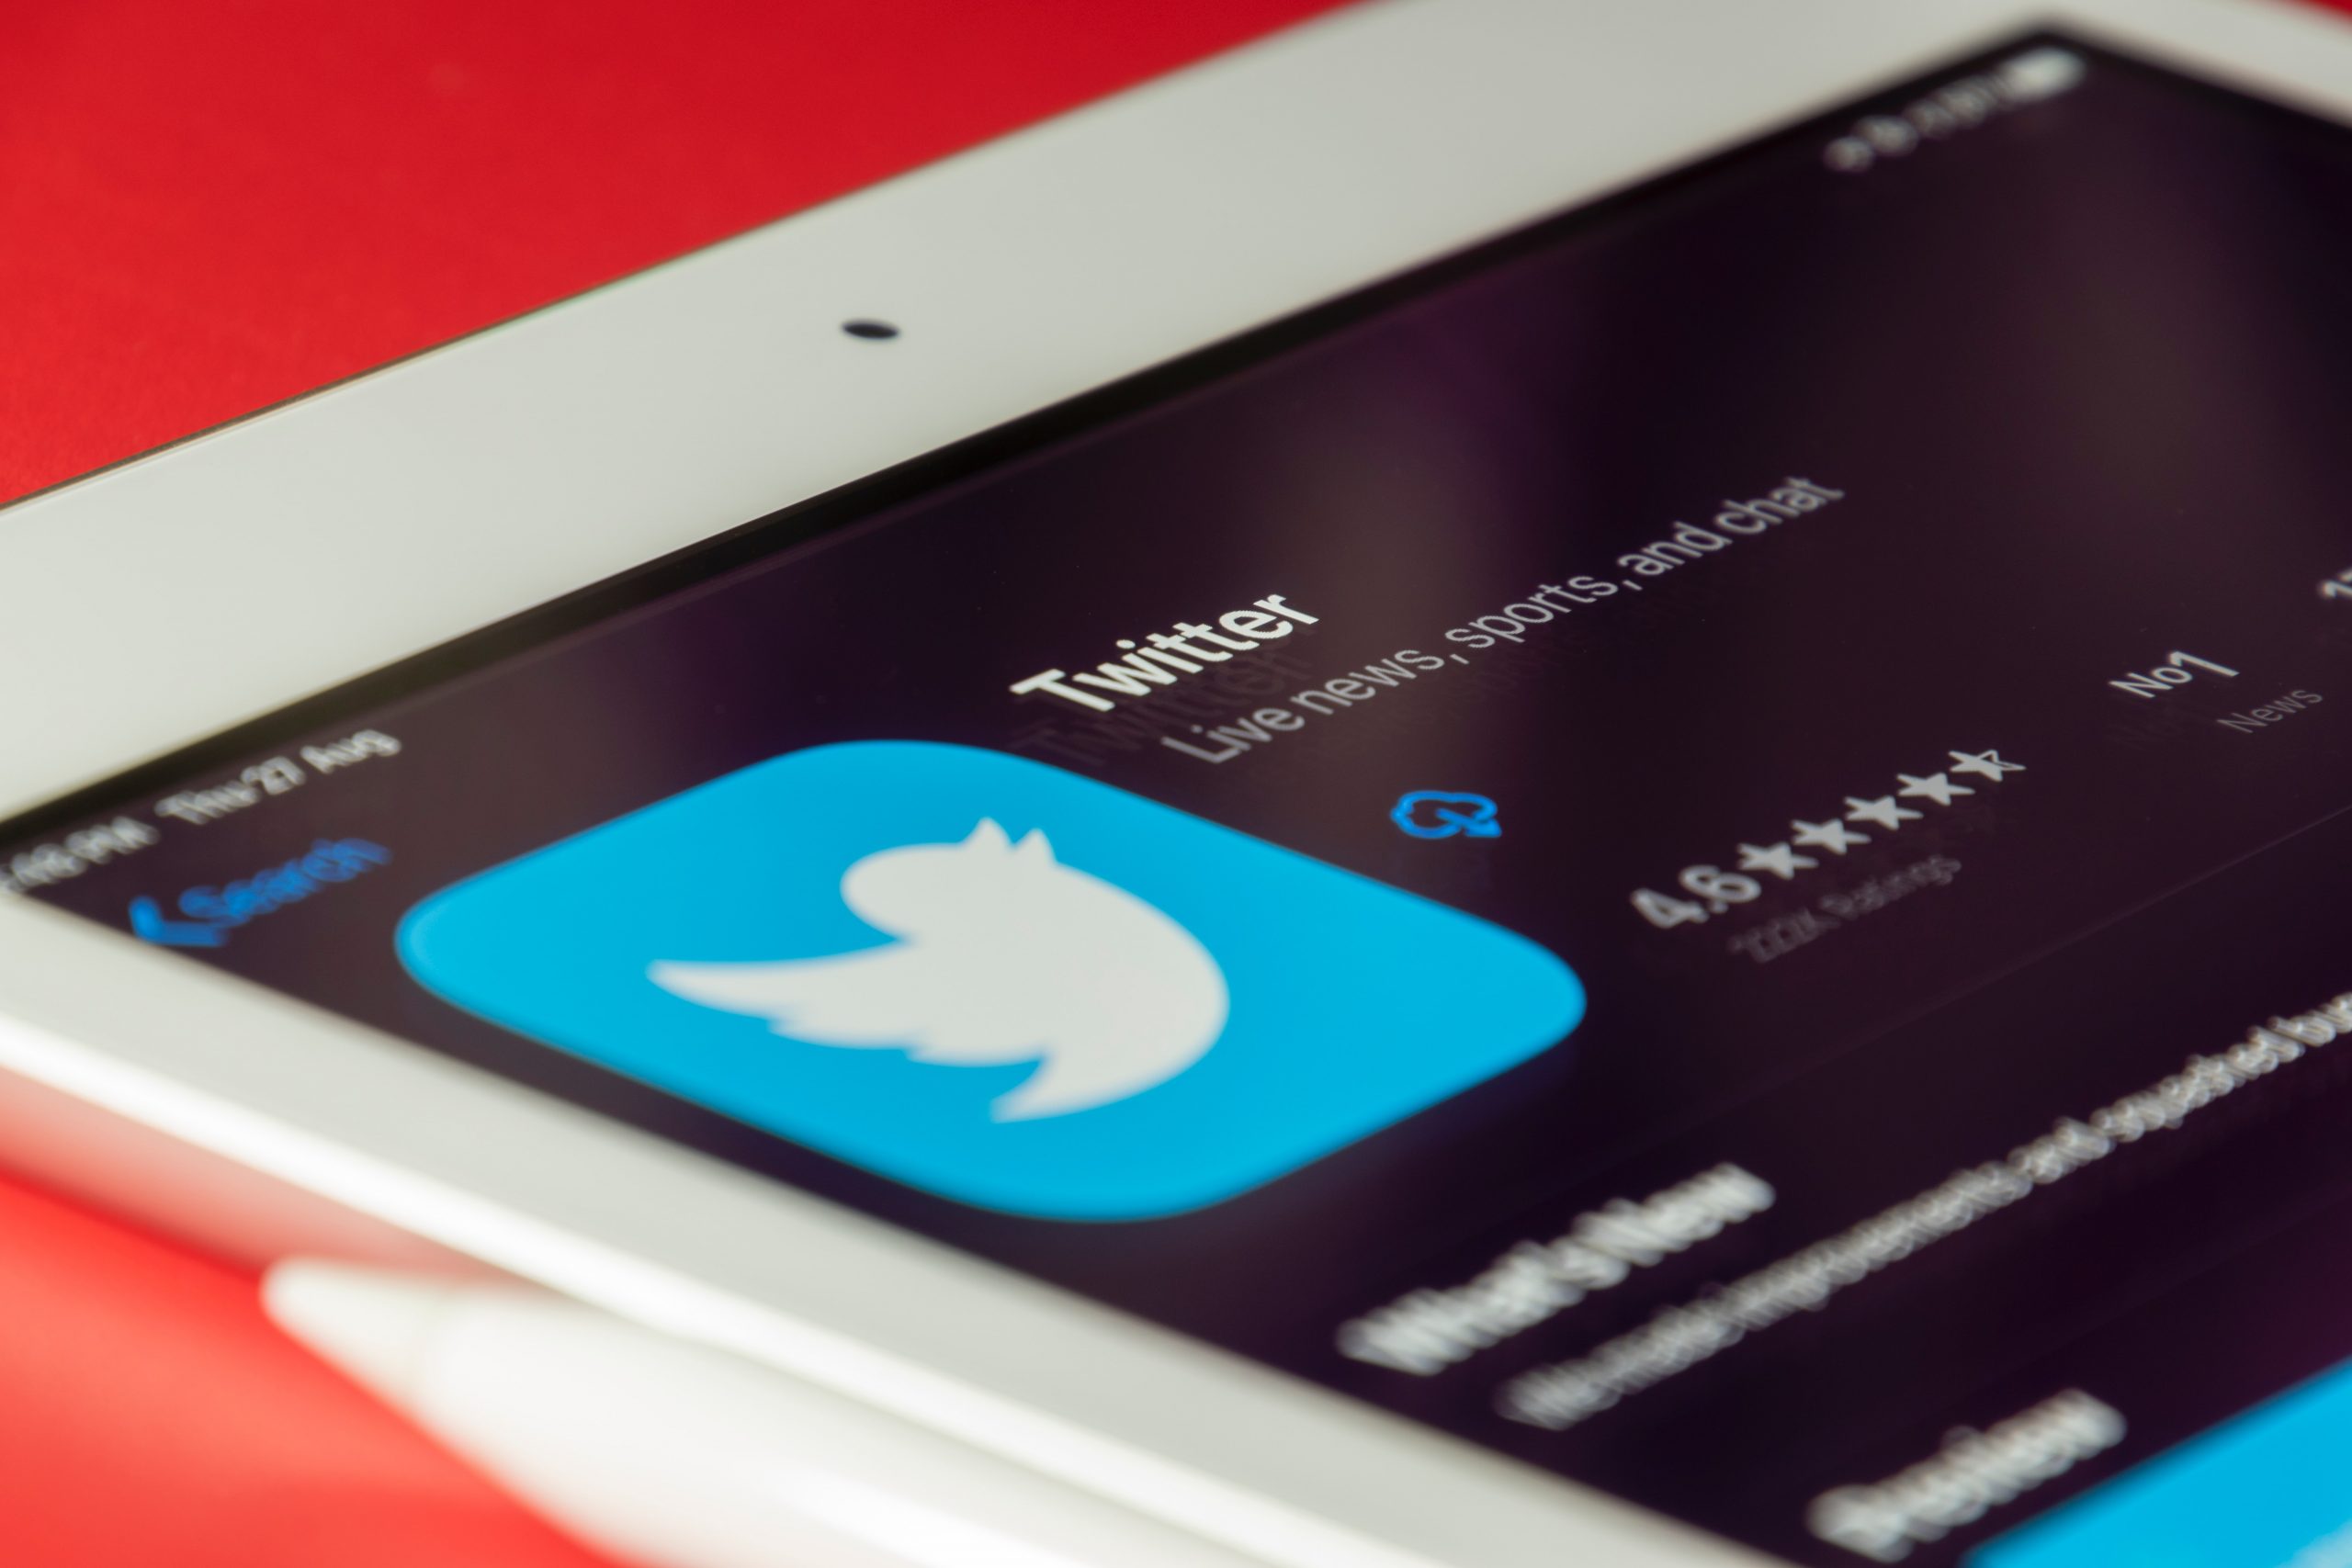 Twitter Is No Longer Secure, According to Former Safety Chief